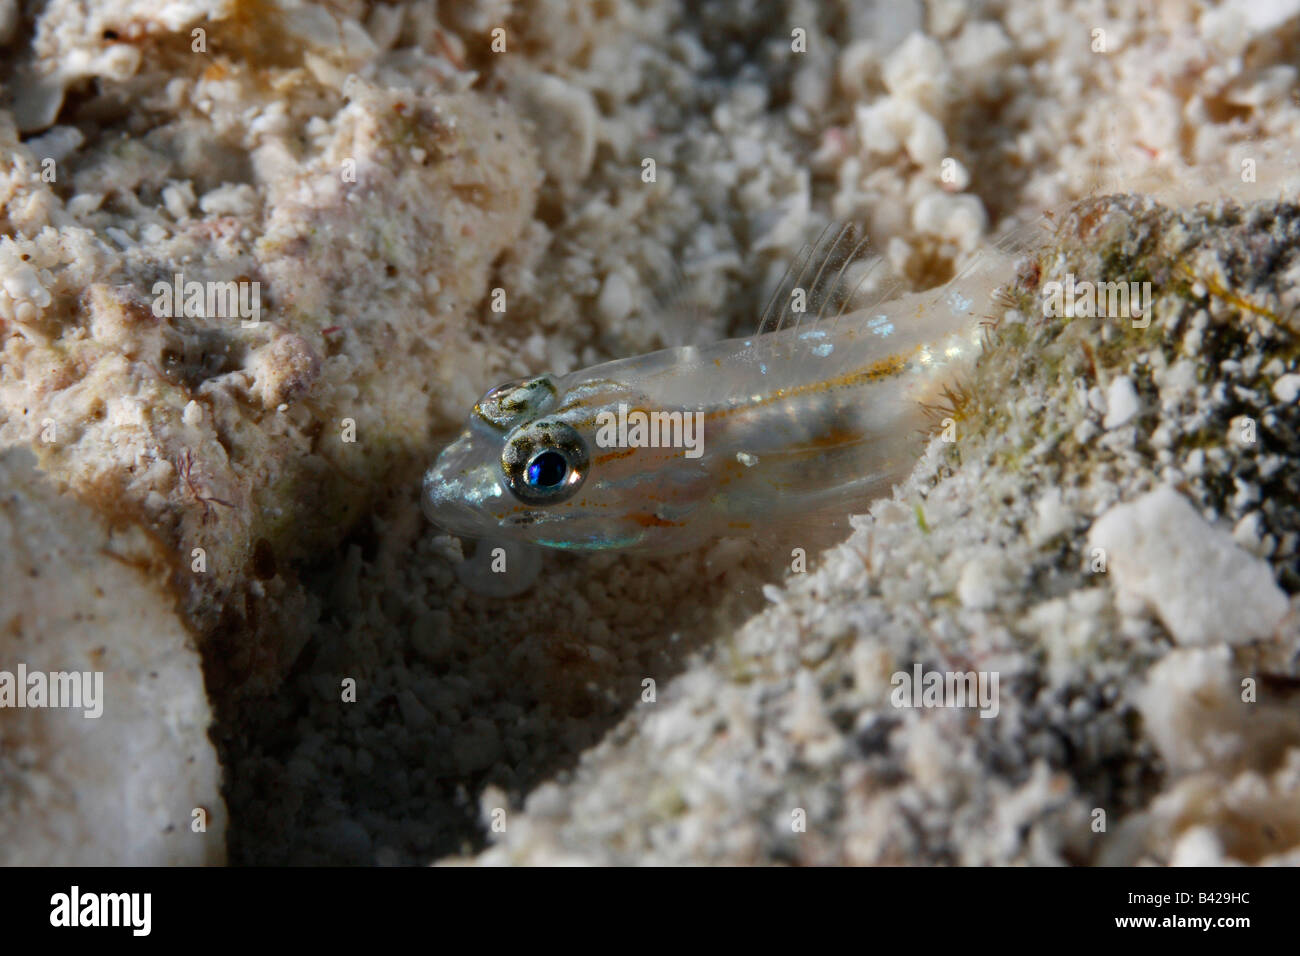 A Tiny Bridled Goby fish on the sandy bottom peeking out of his burrow. Stock Photo